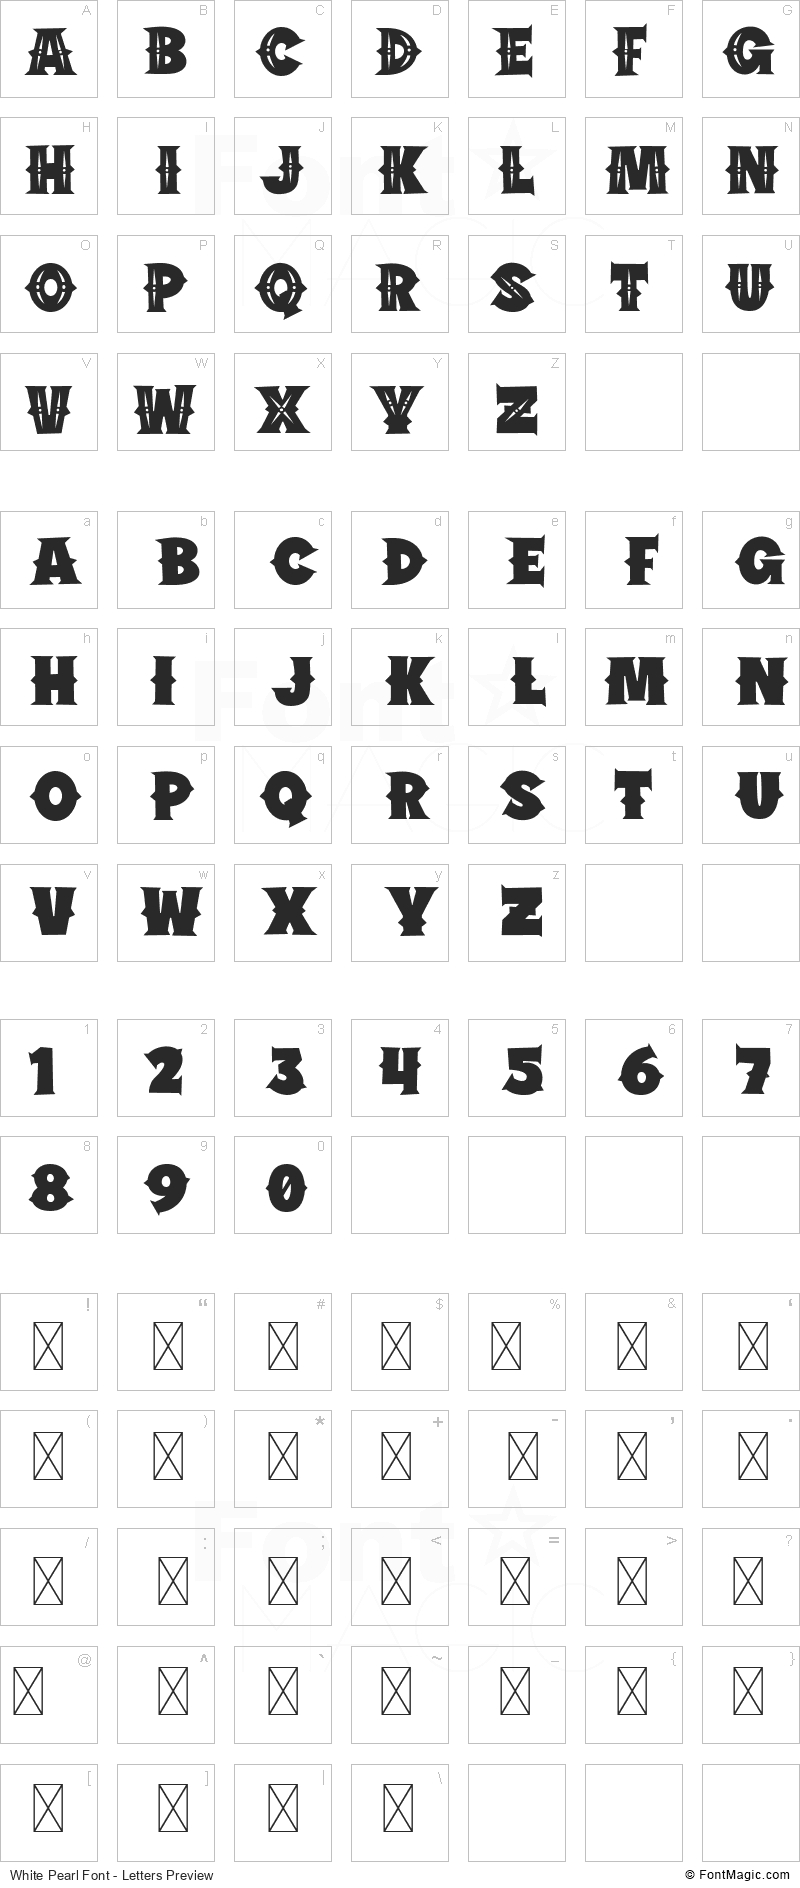 White Pearl Font - All Latters Preview Chart